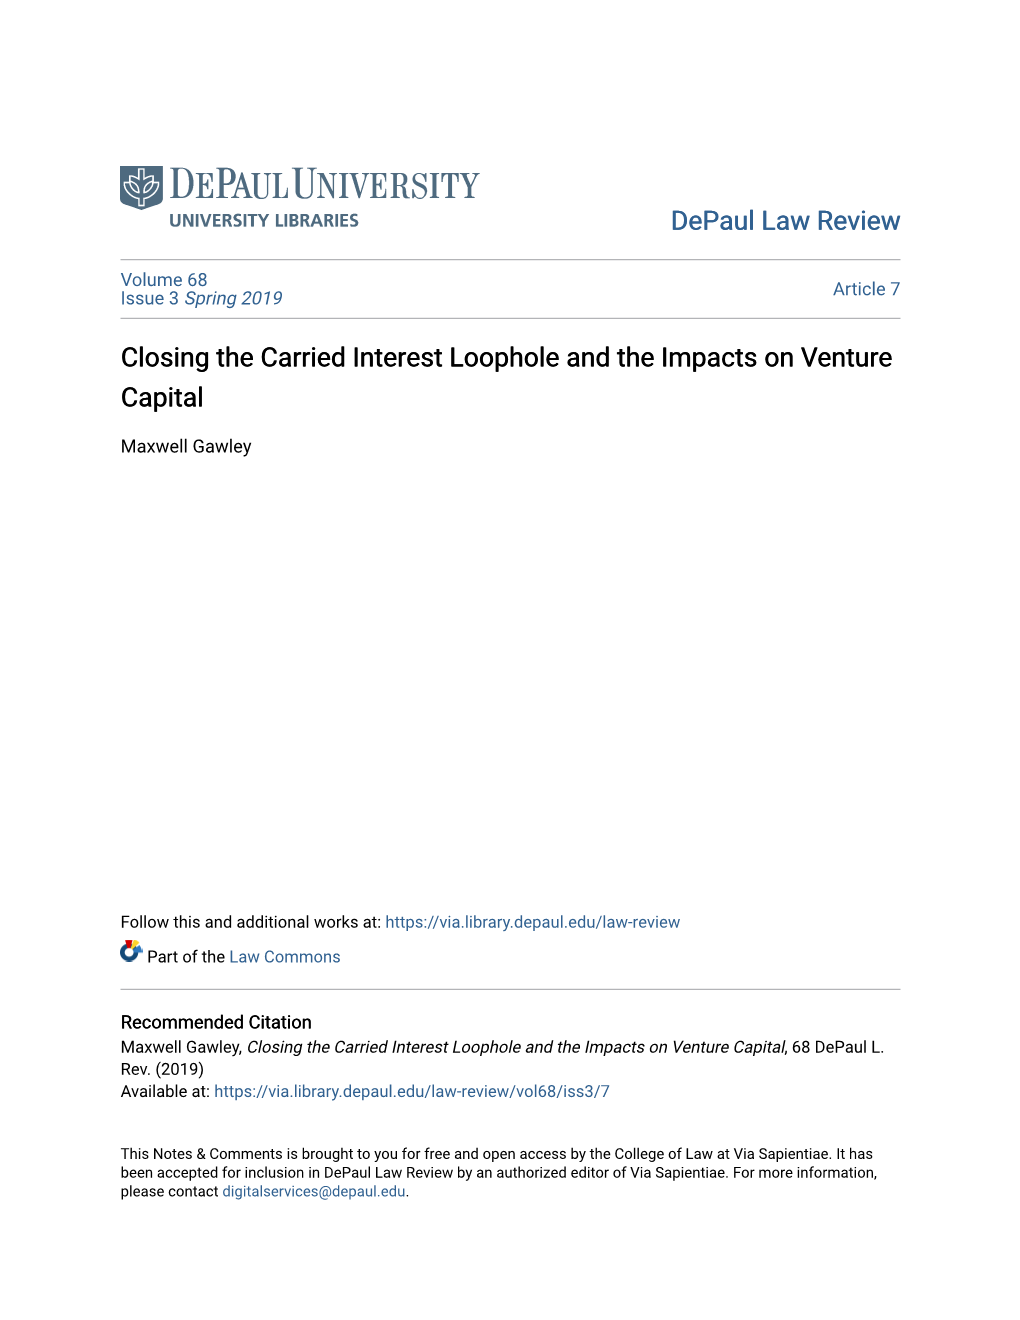 Closing the Carried Interest Loophole and the Impacts on Venture Capital